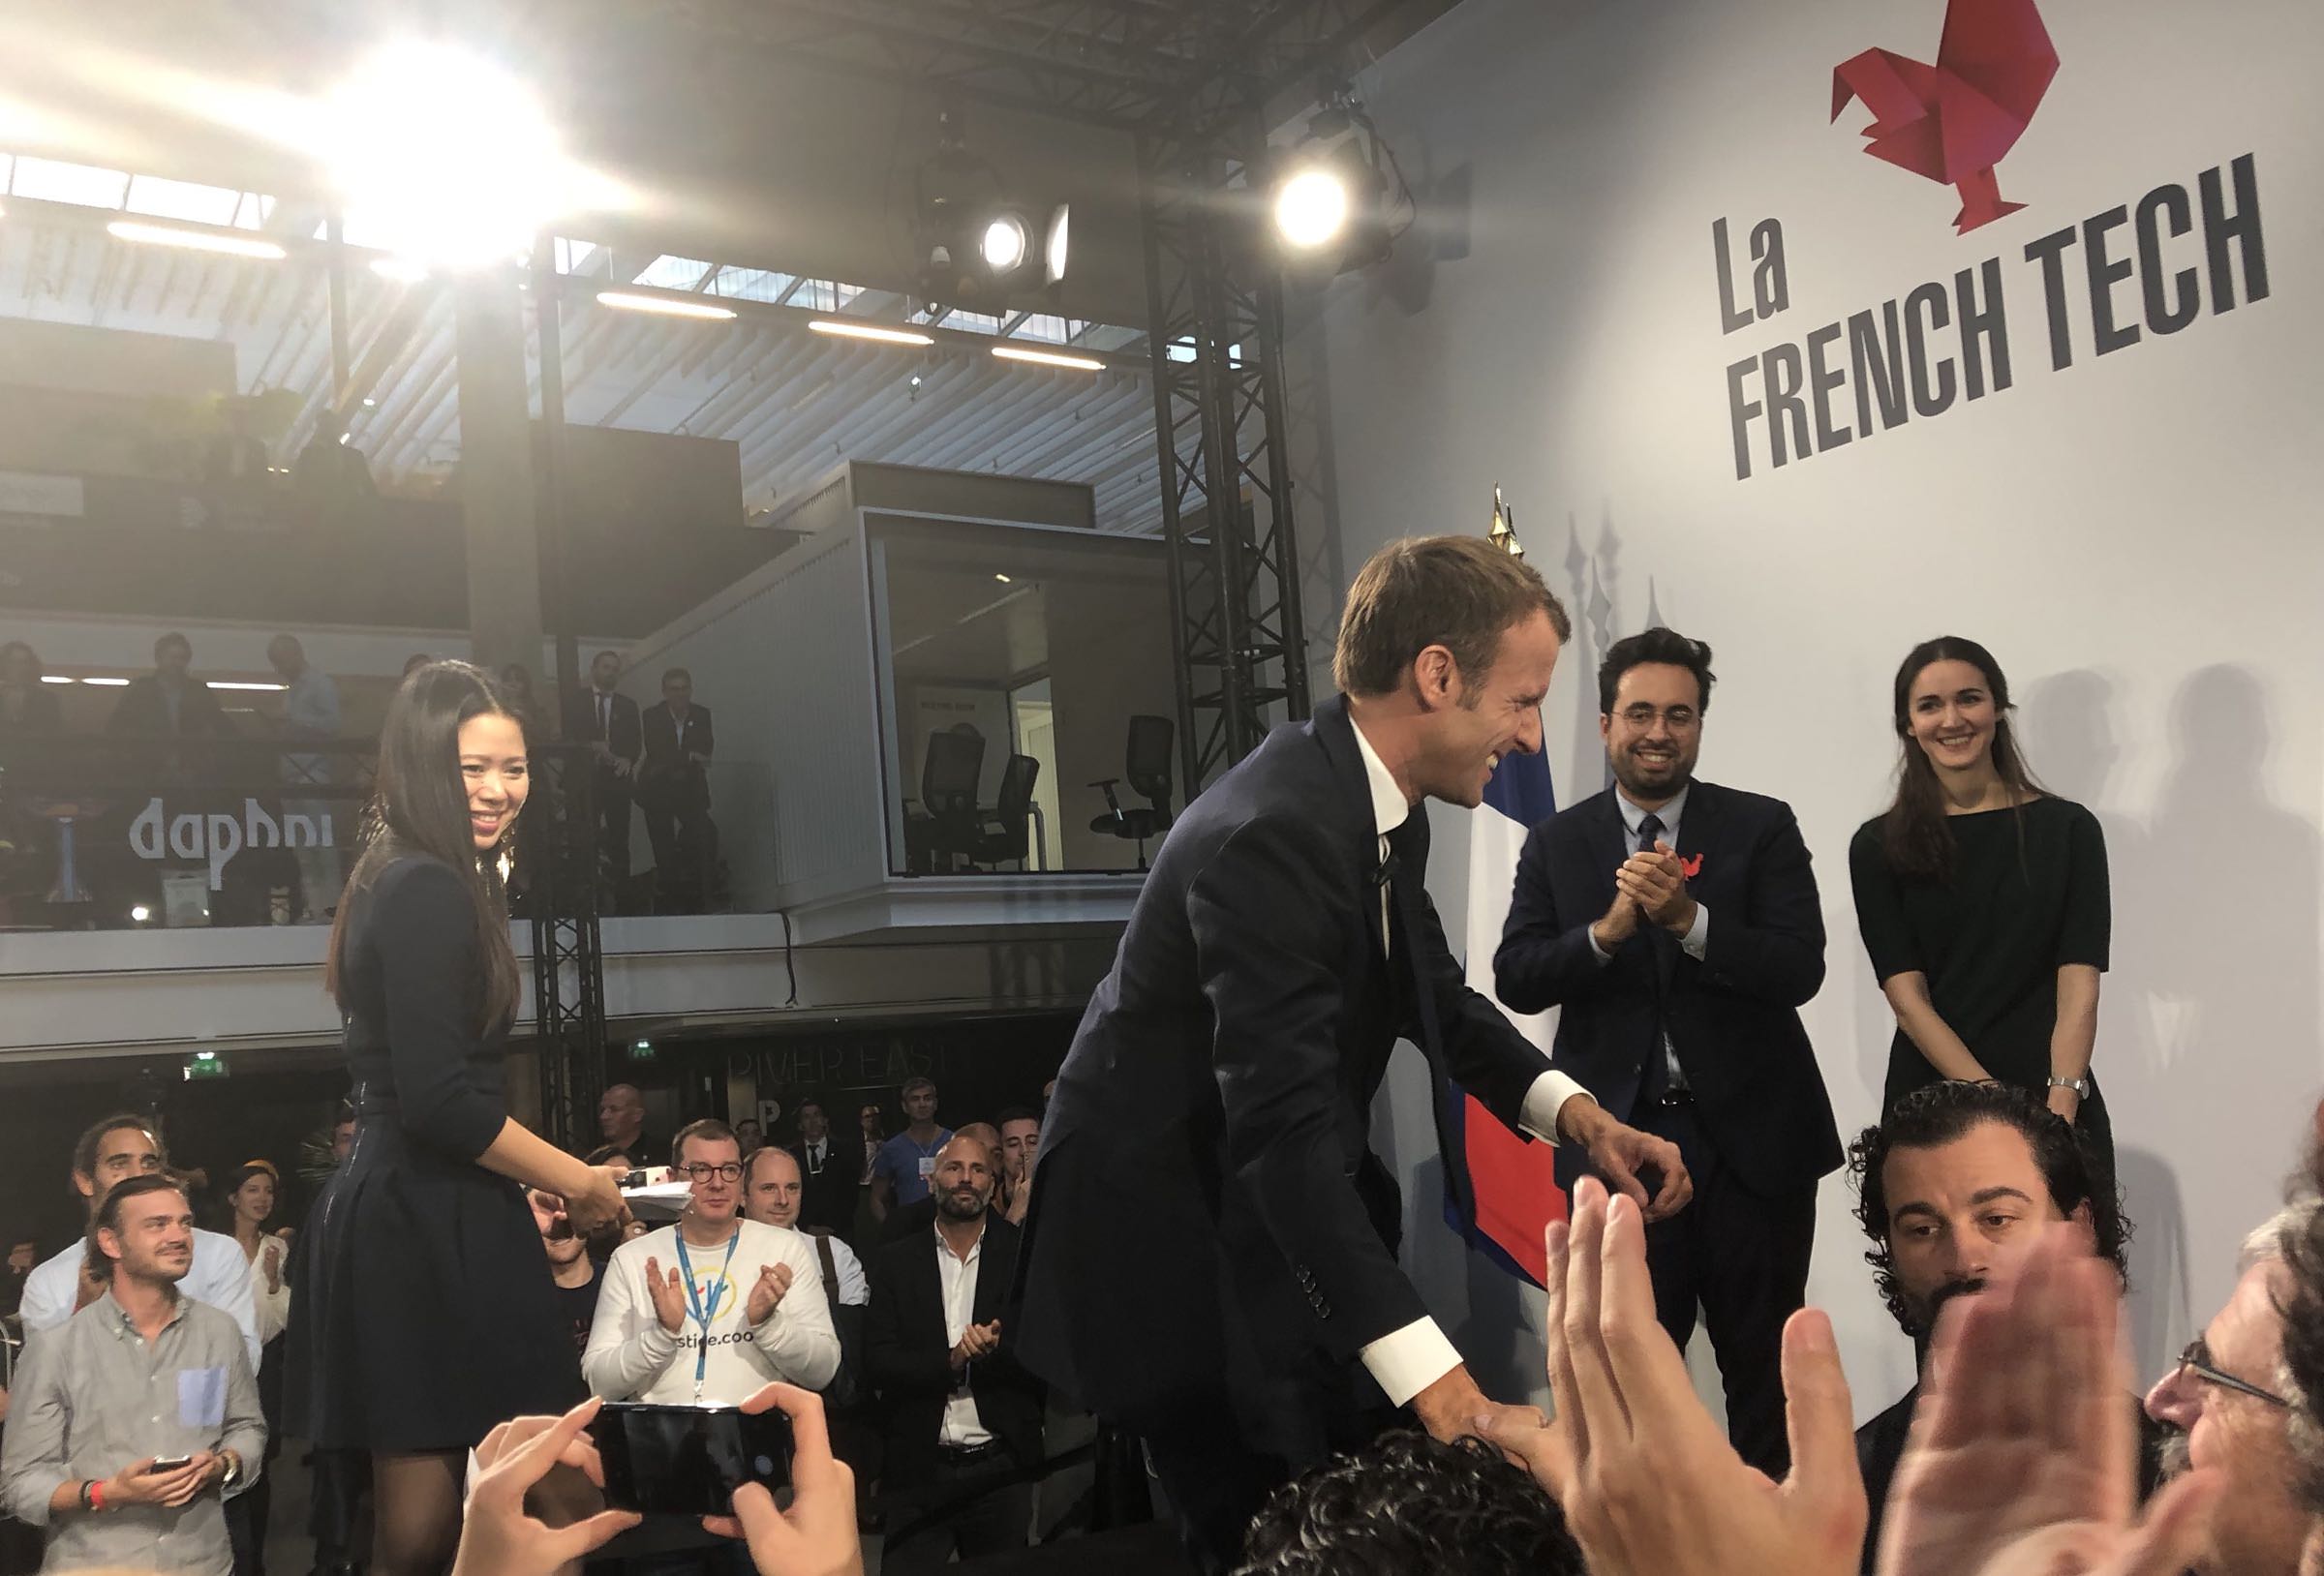 President Macron connecting with the audience by shaking hands after Q&A